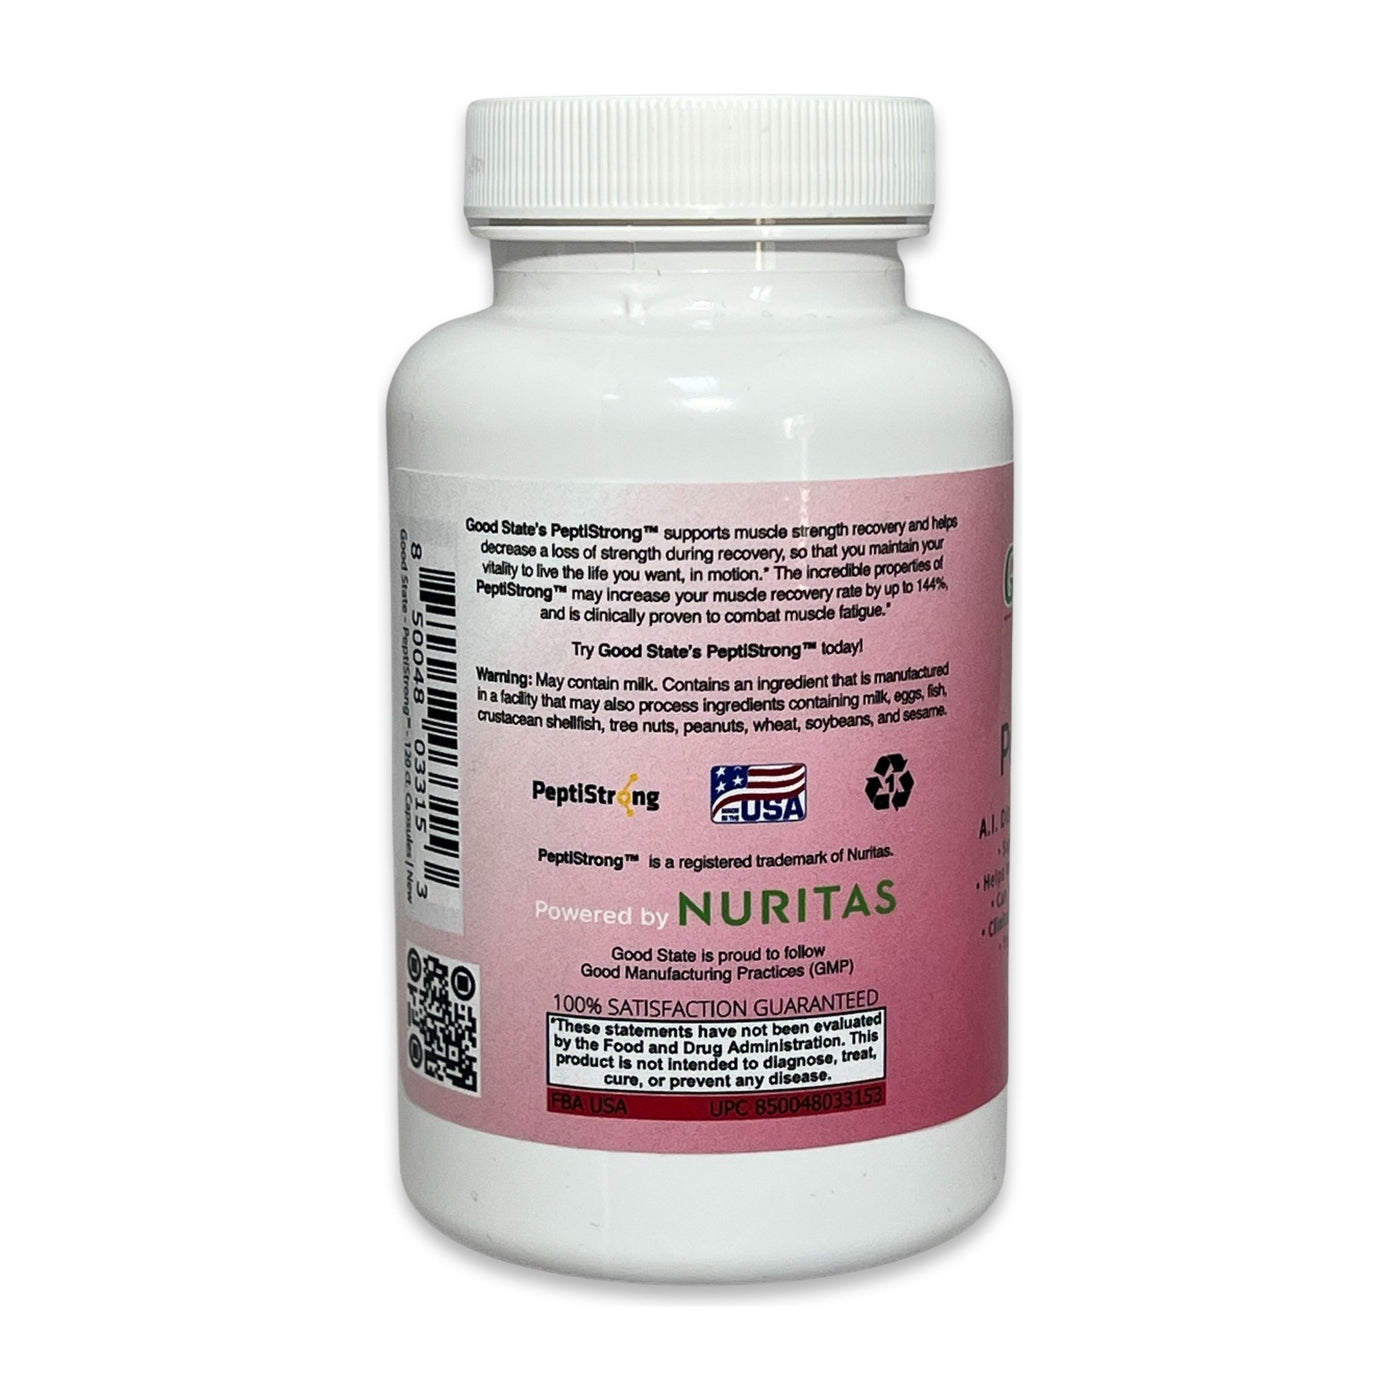 Good State PeptiStrong - Fava Bean (Vicia faba) Protein Hydrolysate - 2.4 Grams per Serving - 120 Capsules - Helps Increase Muscle Recovery